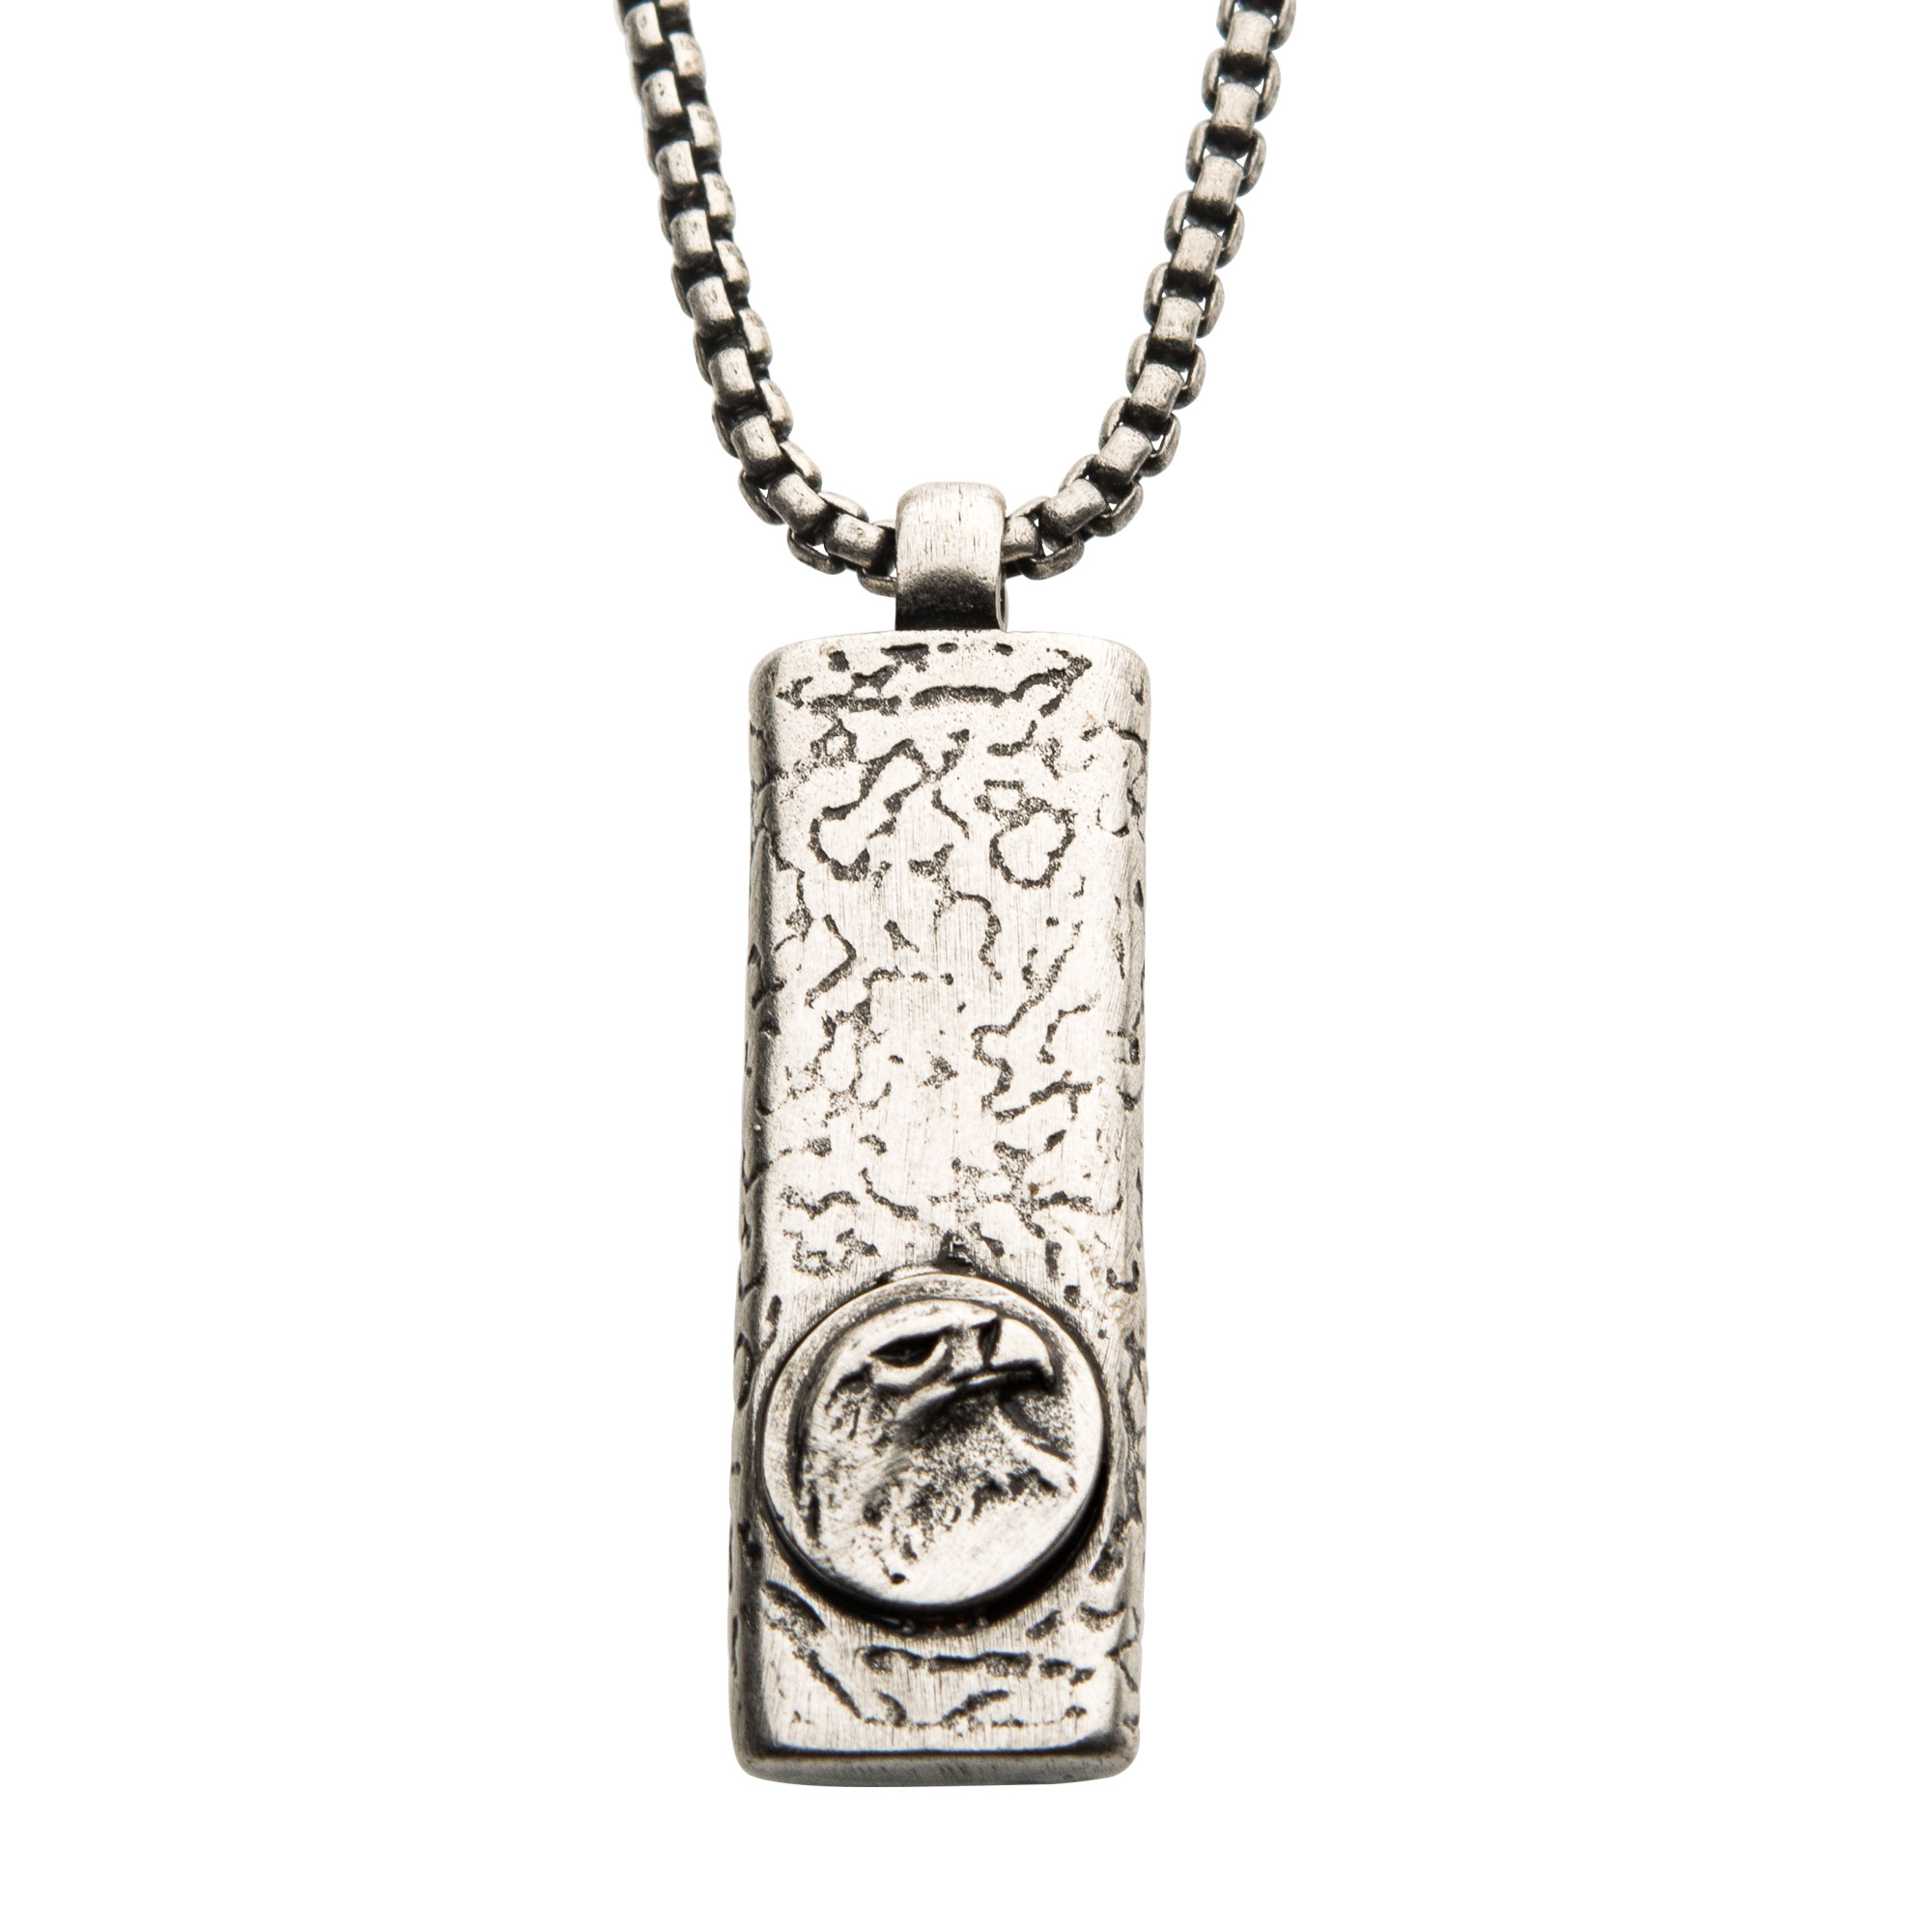 Stainless Steel Silver Plated Dog Tag Pendant with Eagle Head Inlay, with Steel Box Chain Enchanted Jewelry Plainfield, CT